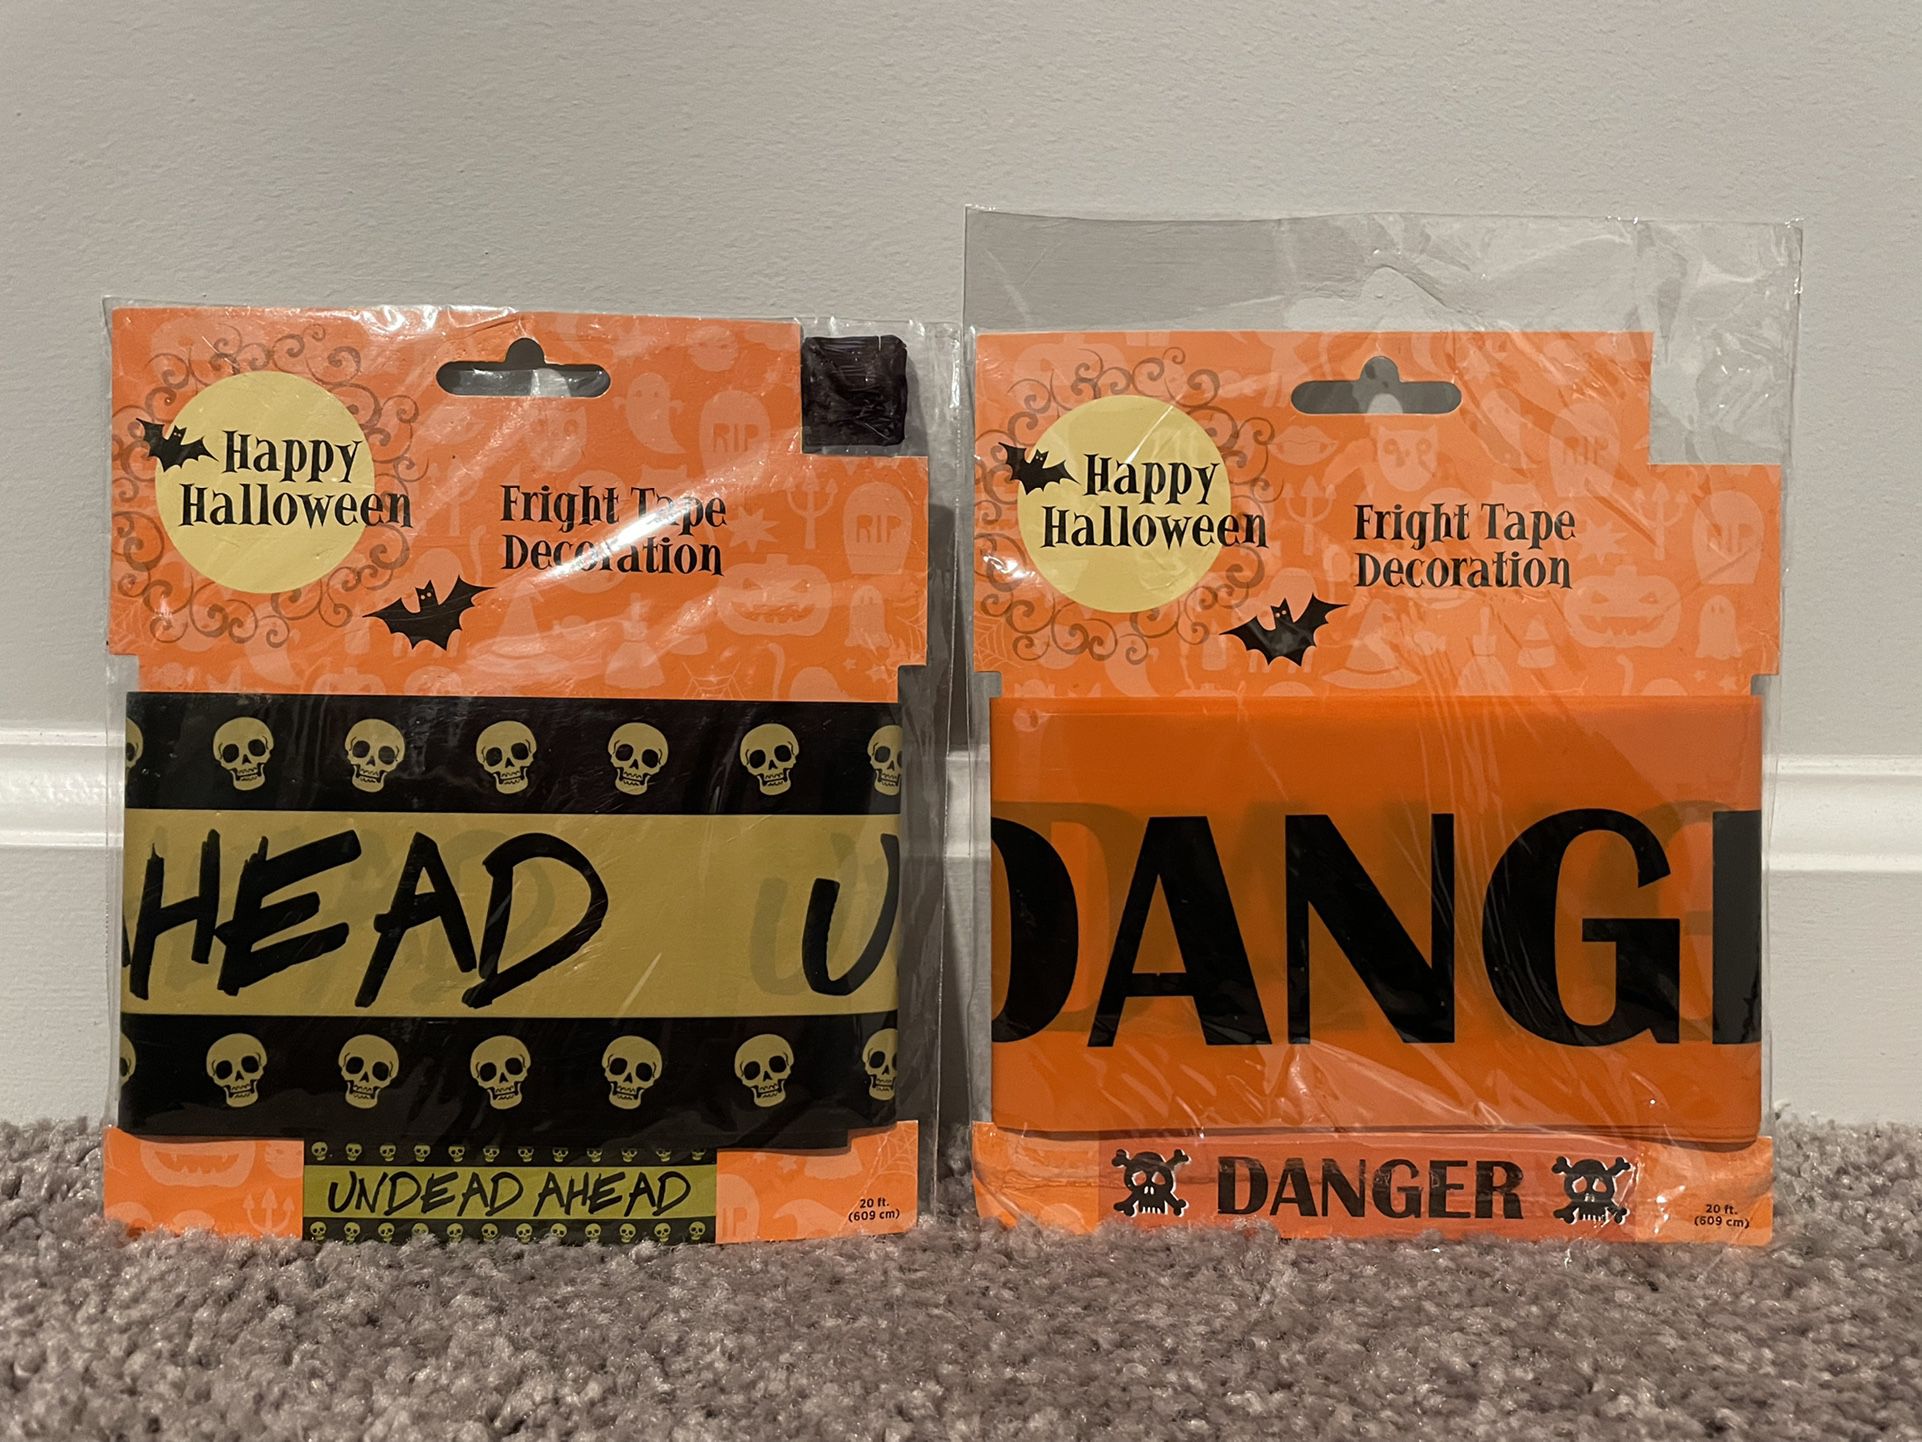 NEW IN PACKAGE “Undead Ahead” and “Danger” Fright Tape Decor